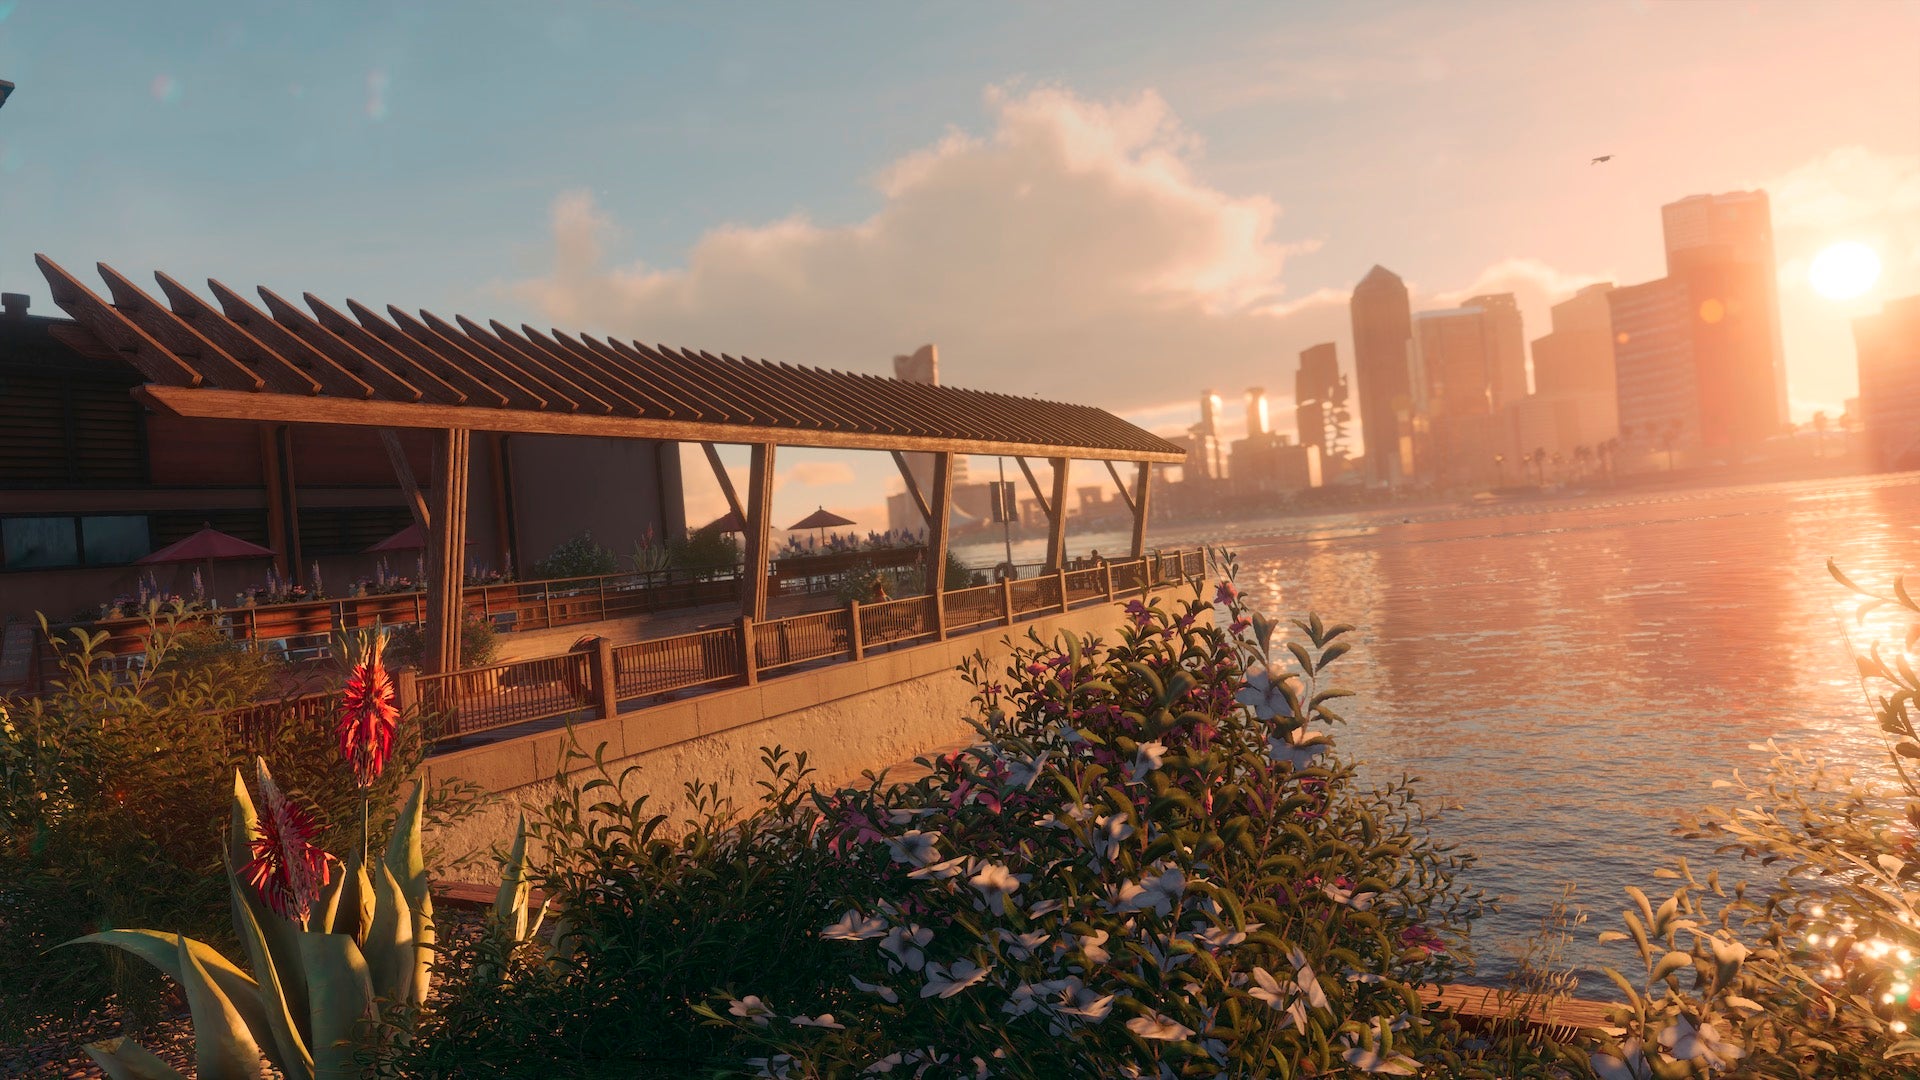 A shot of a lakeside bar looking out over Santo Ileso in Saints Row.